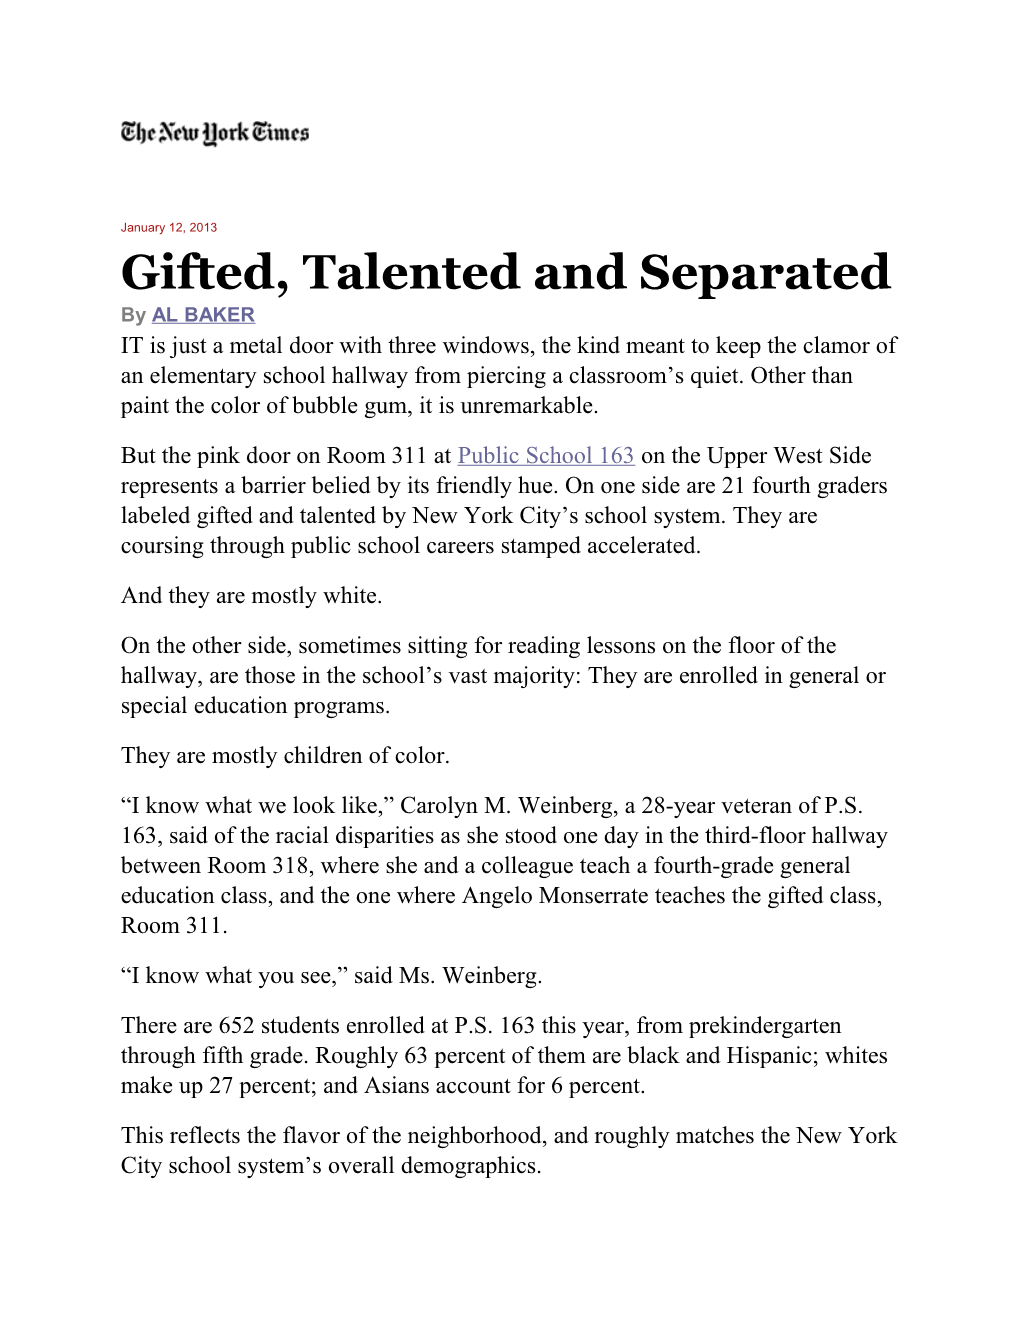 Gifted, Talented and Separated